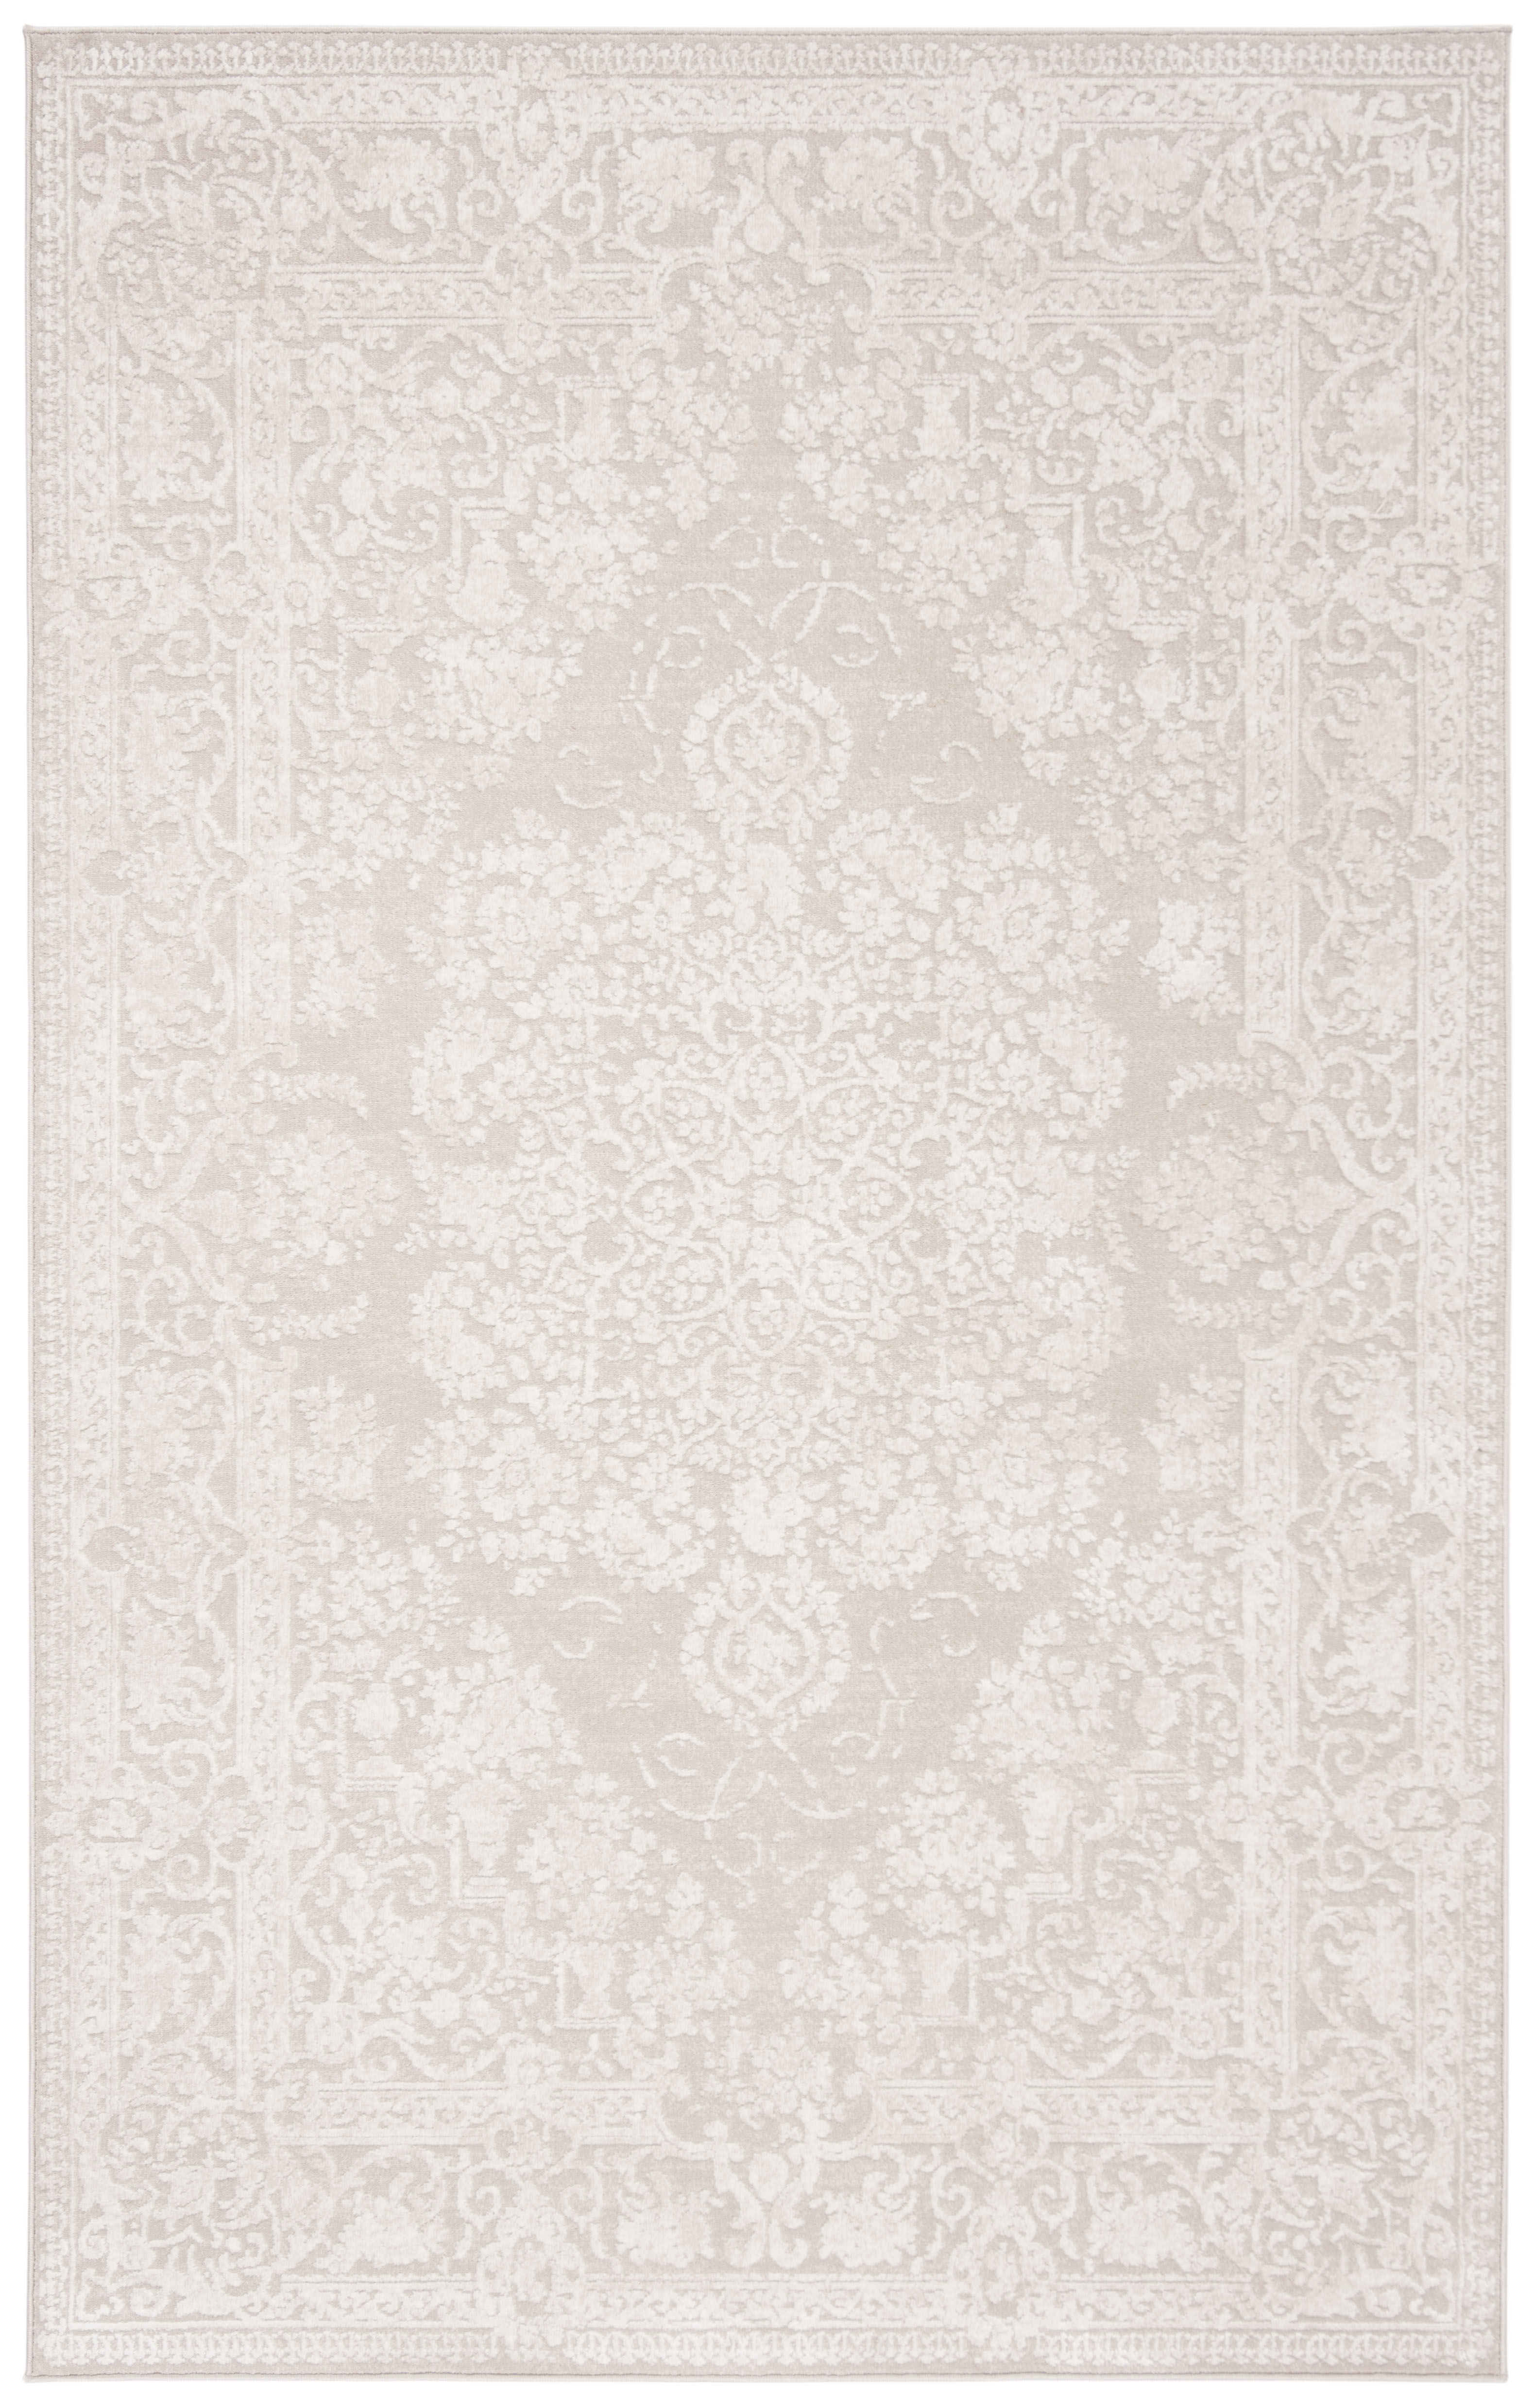 Arlo Home Woven Area Rug, RFT664D, Cream/Ivory,  6' X 9' - Image 0